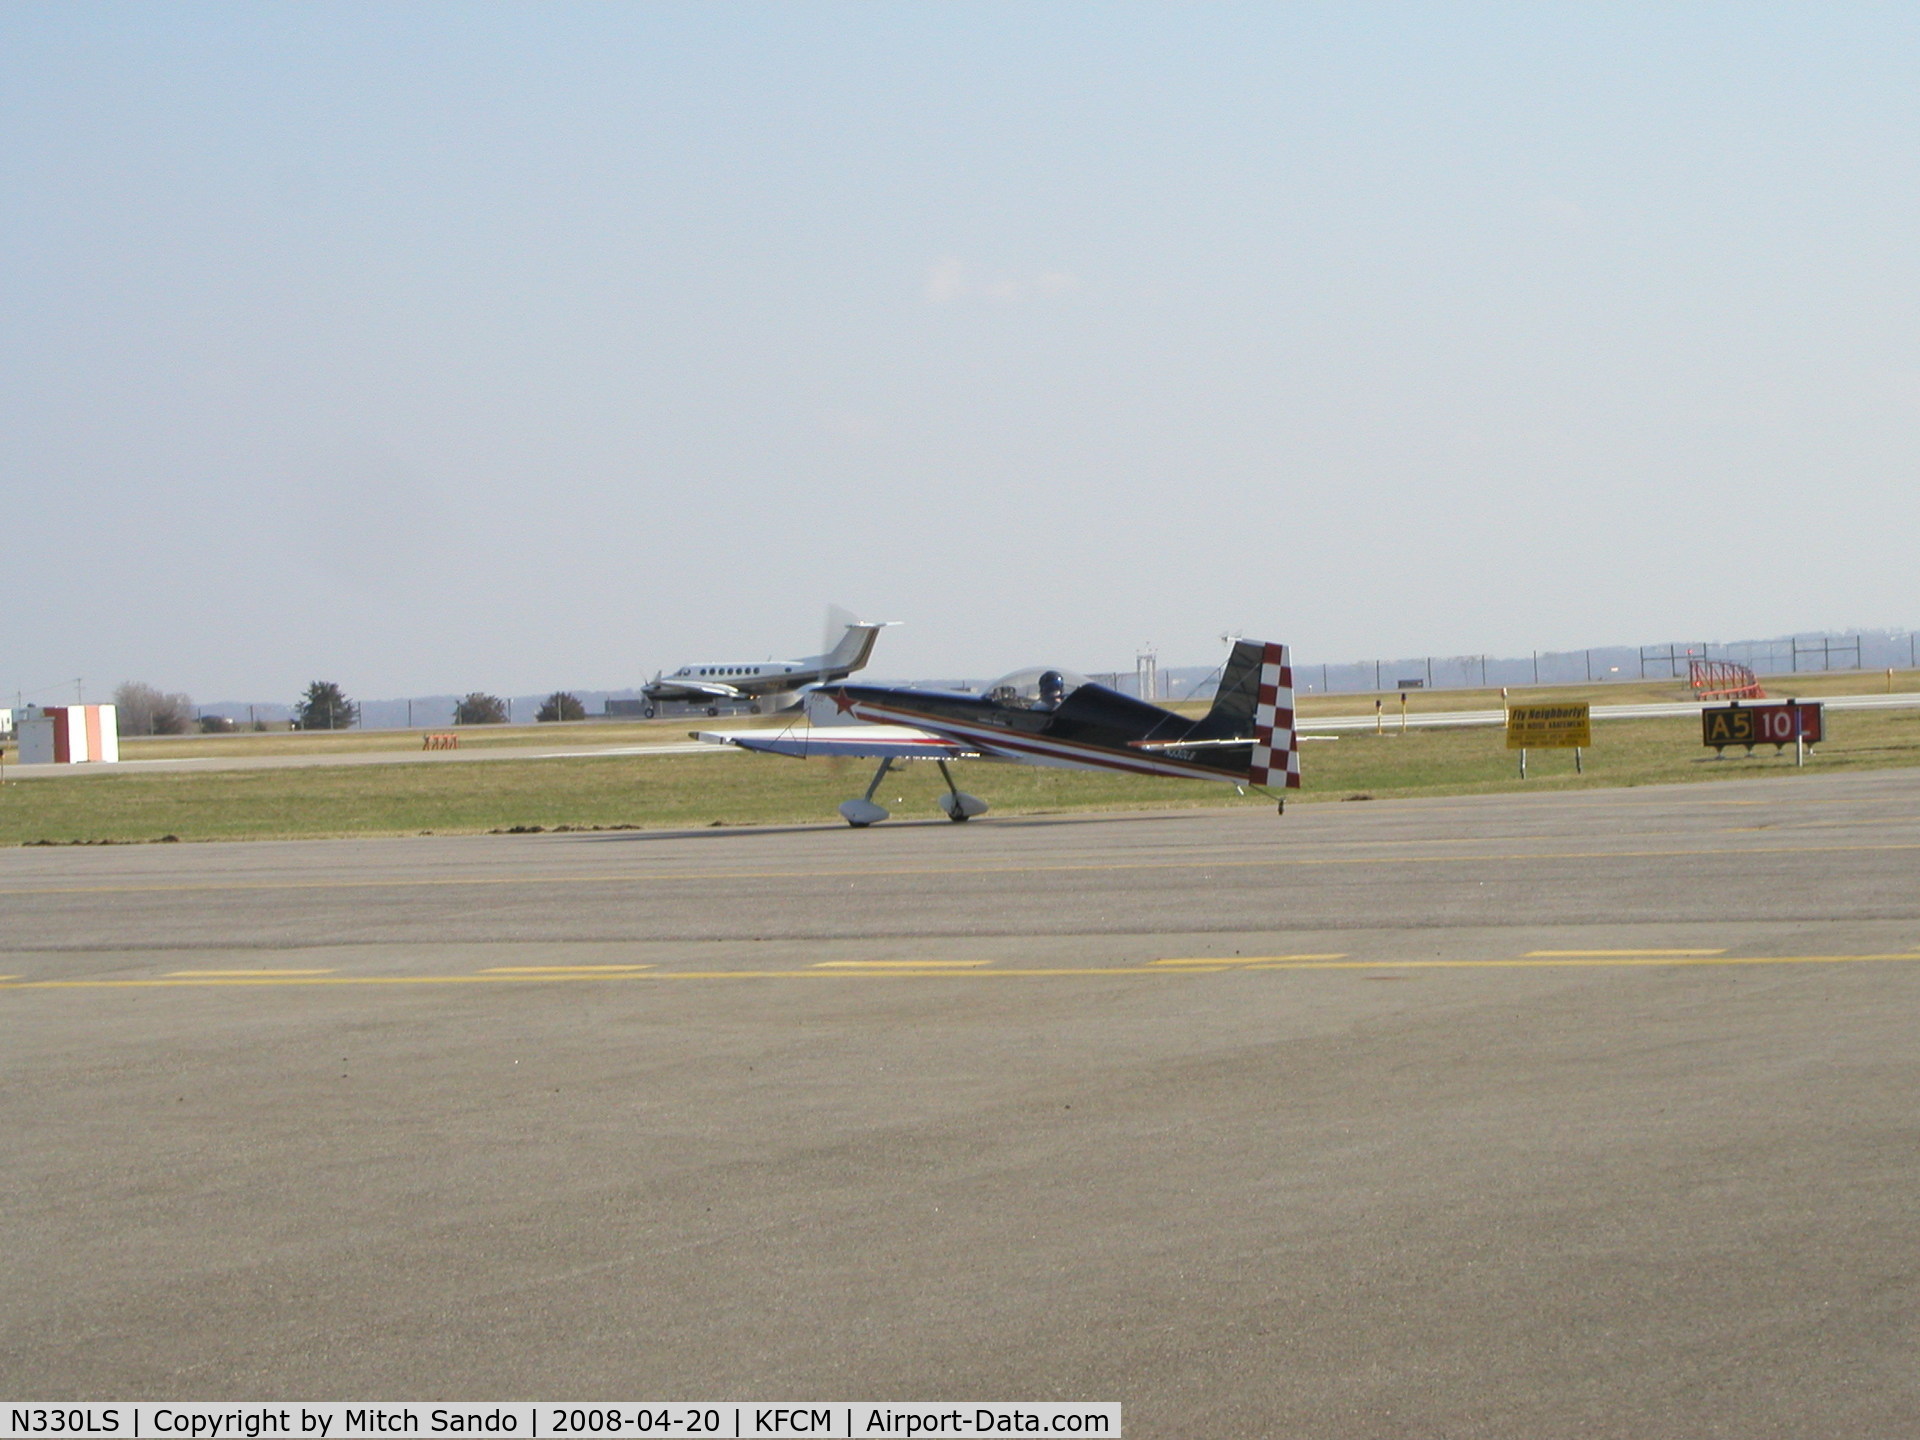 N330LS, 2000 Panzl S-330P C/N 001, Running up the engine at Runway 10L.